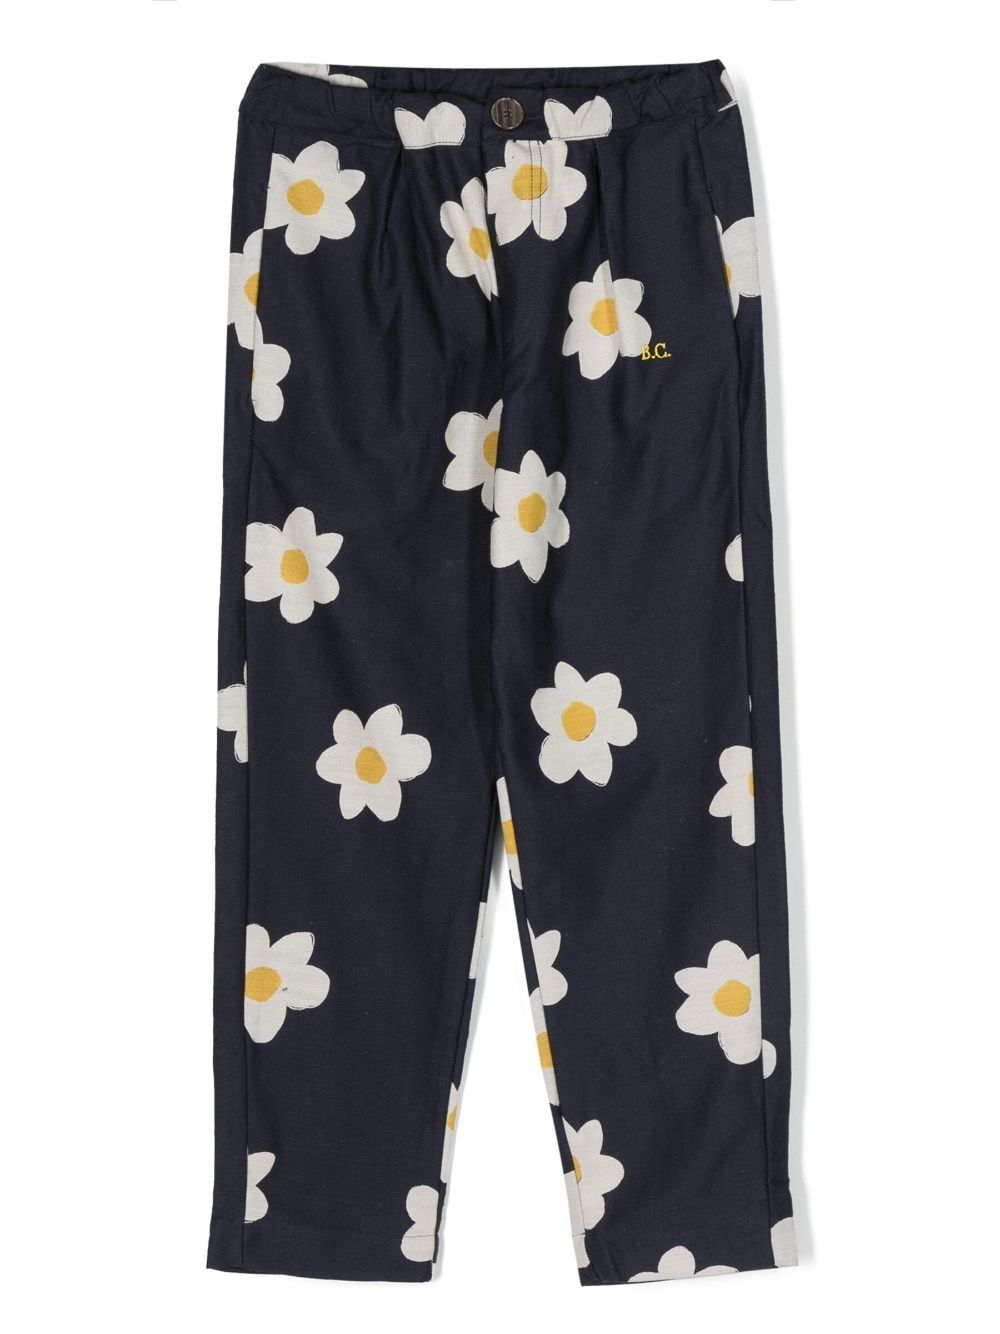 Bobo Choses Big Flower All Over Baggy Pants In Black